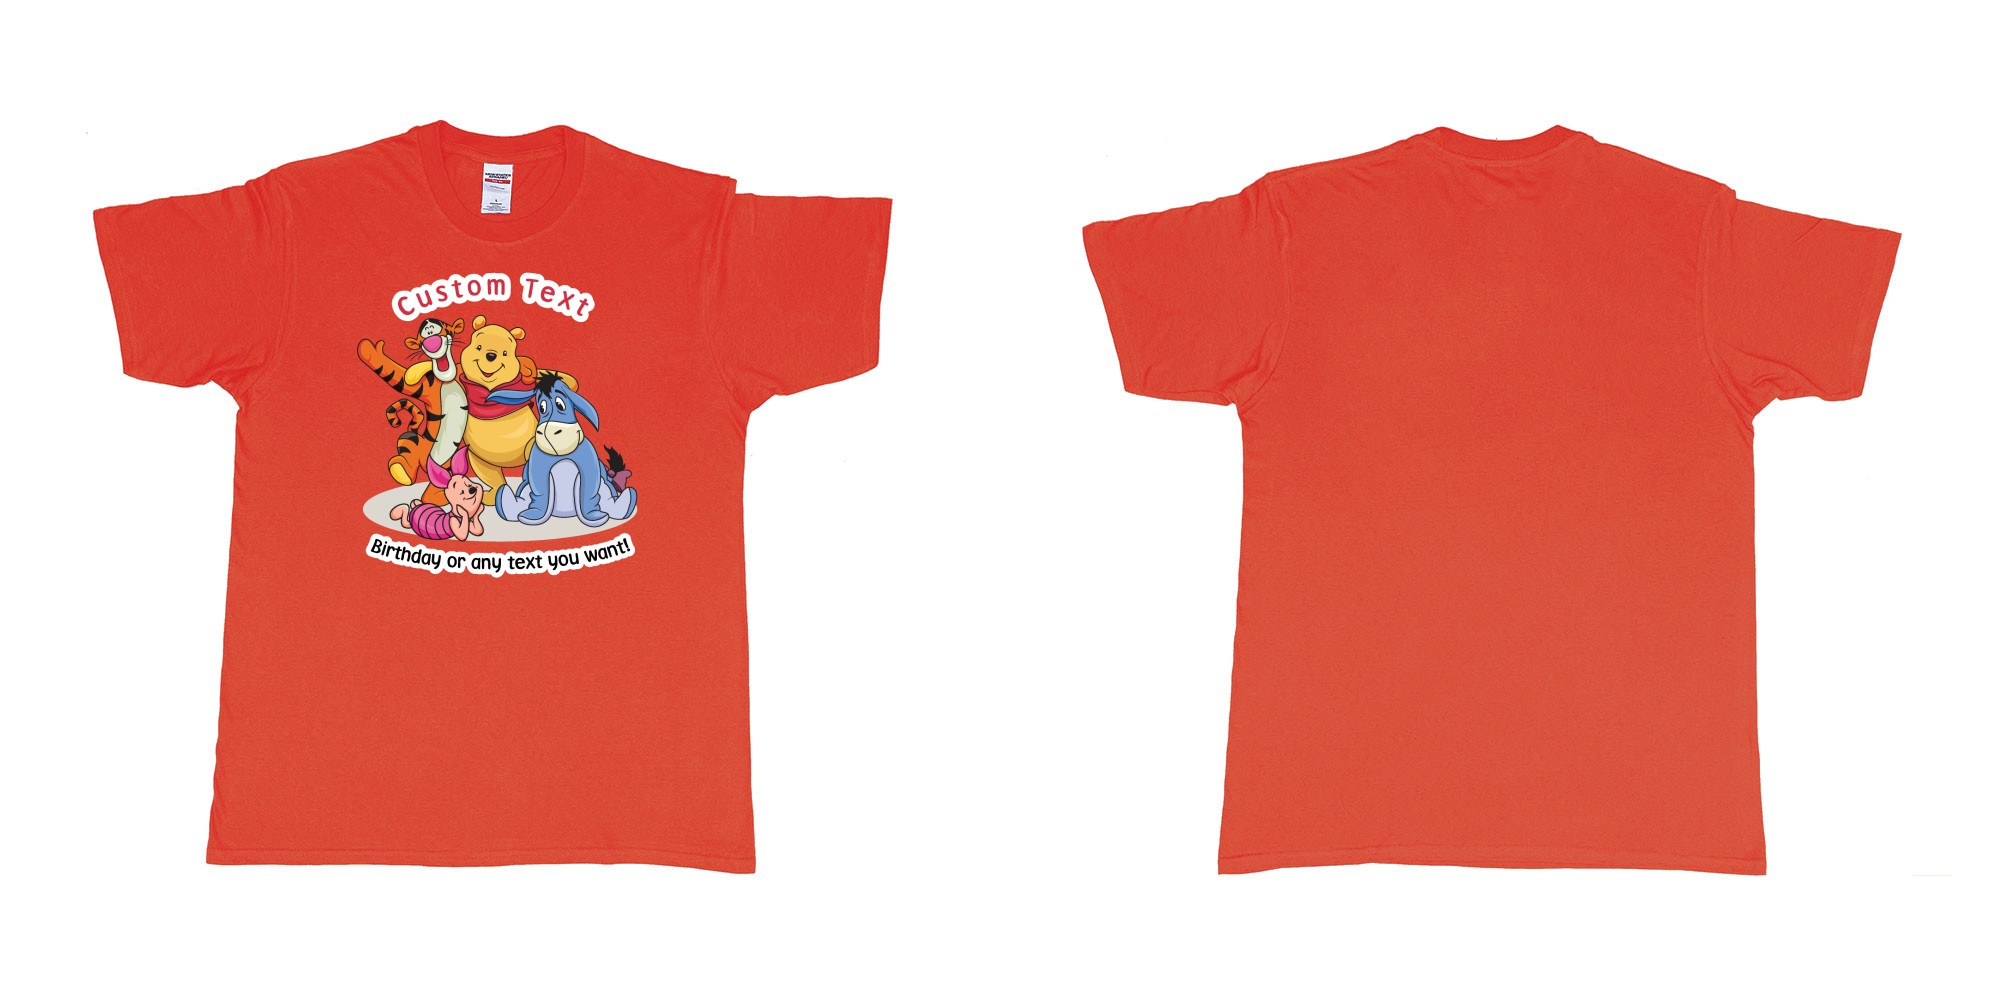 Custom tshirt design winnie the pooh and friend in fabric color red choice your own text made in Bali by The Pirate Way